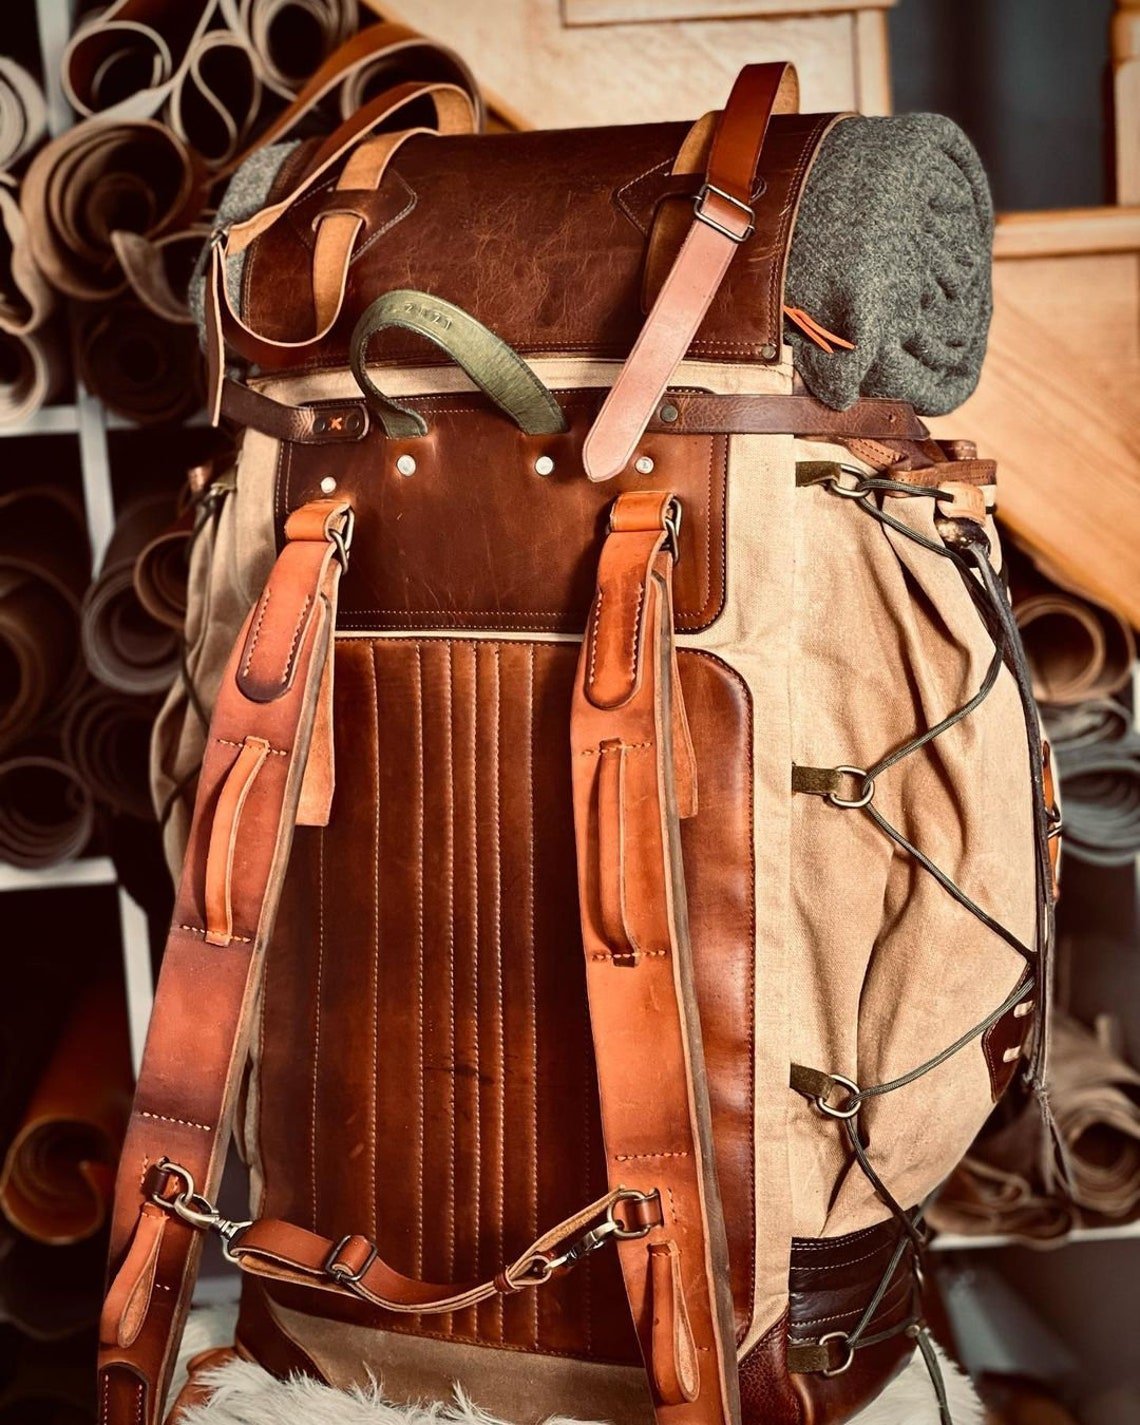 200USD Discount | Bushcraft Design Finalist | Handmade Leather and Canvas Backpack for Travel, Camping,Military | 45 Liter | Personalization bushcraft - camping - hiking backpack 99percenthandmade   